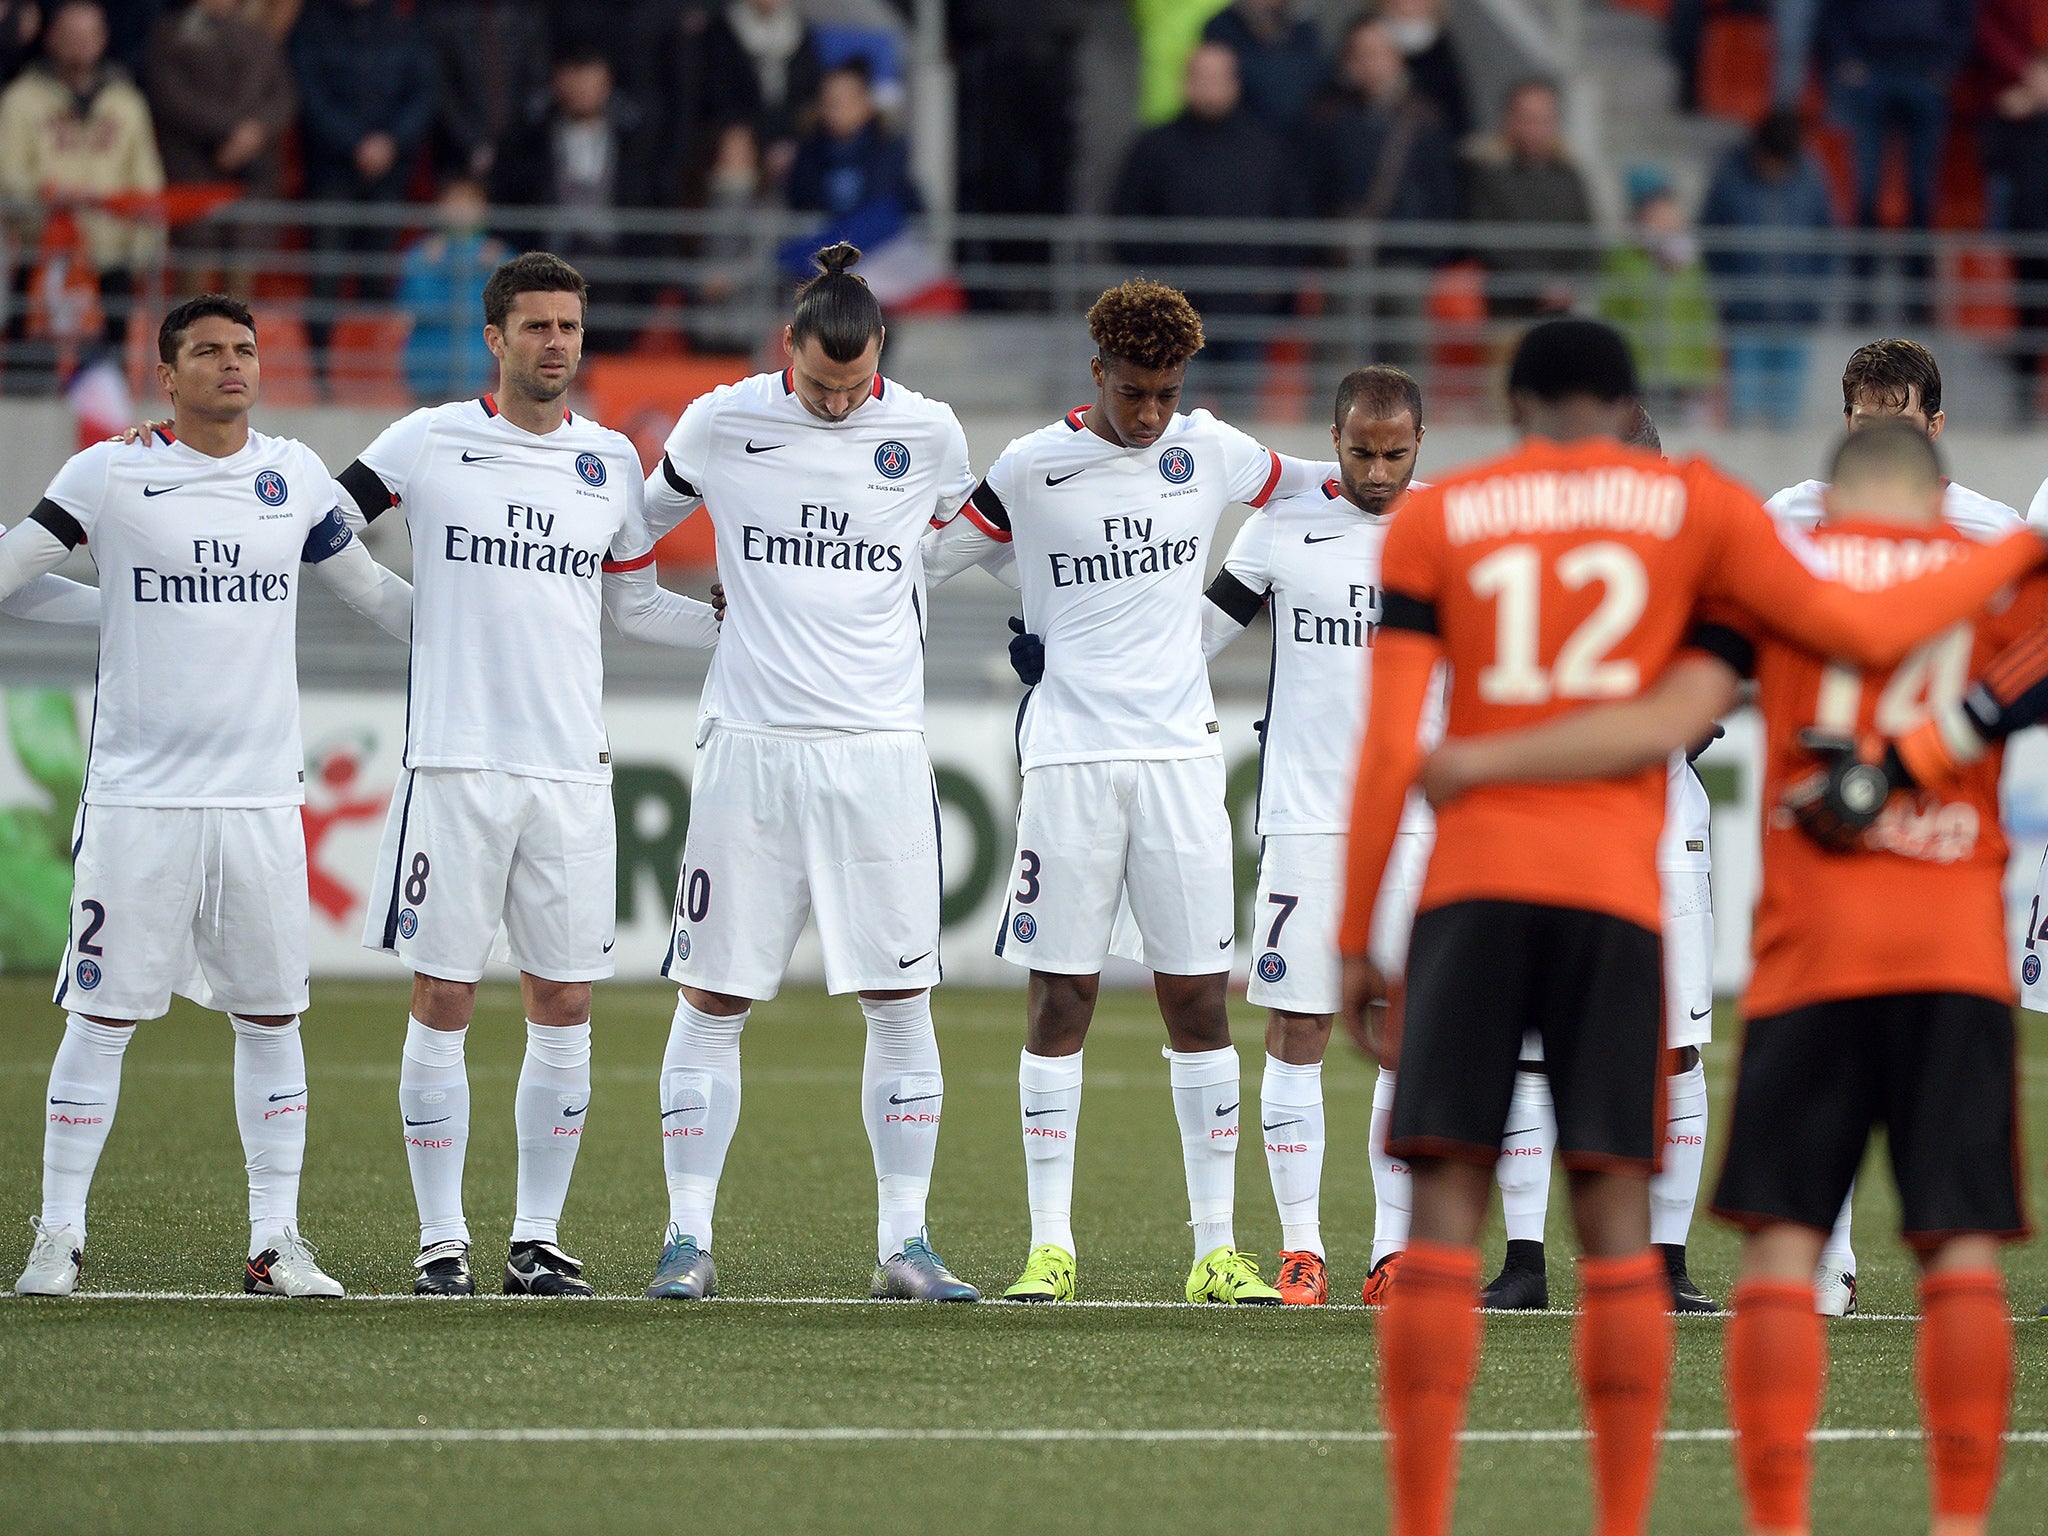 Paris Saint-Germain observe a minute's silence for the victims of the Paris attacks